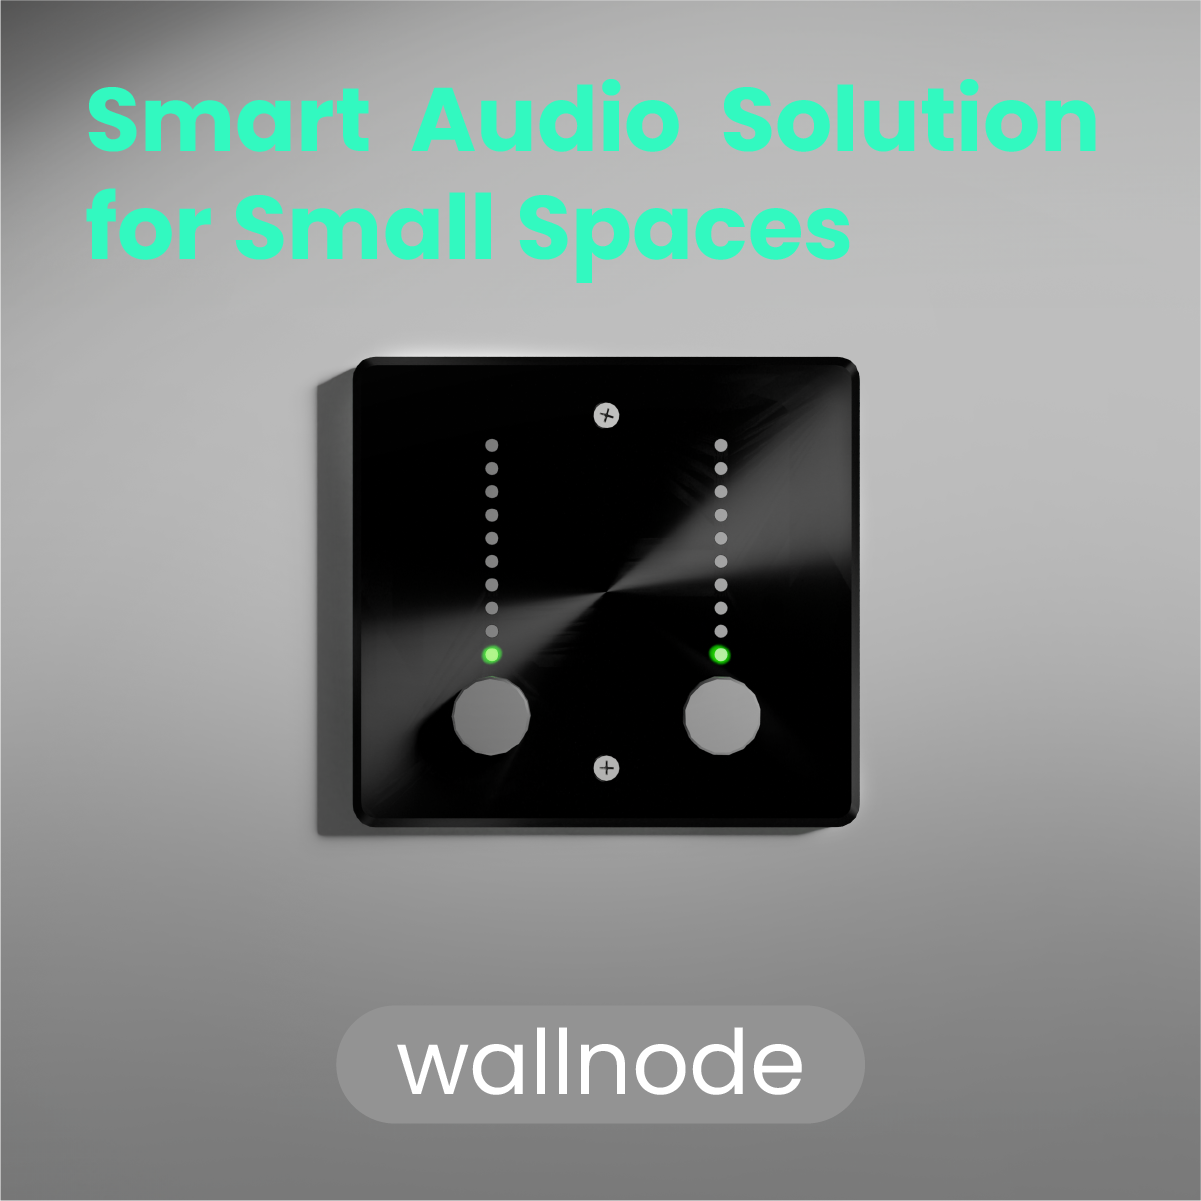  The wallnode device is presented as a smart audio solution for small spaces. 